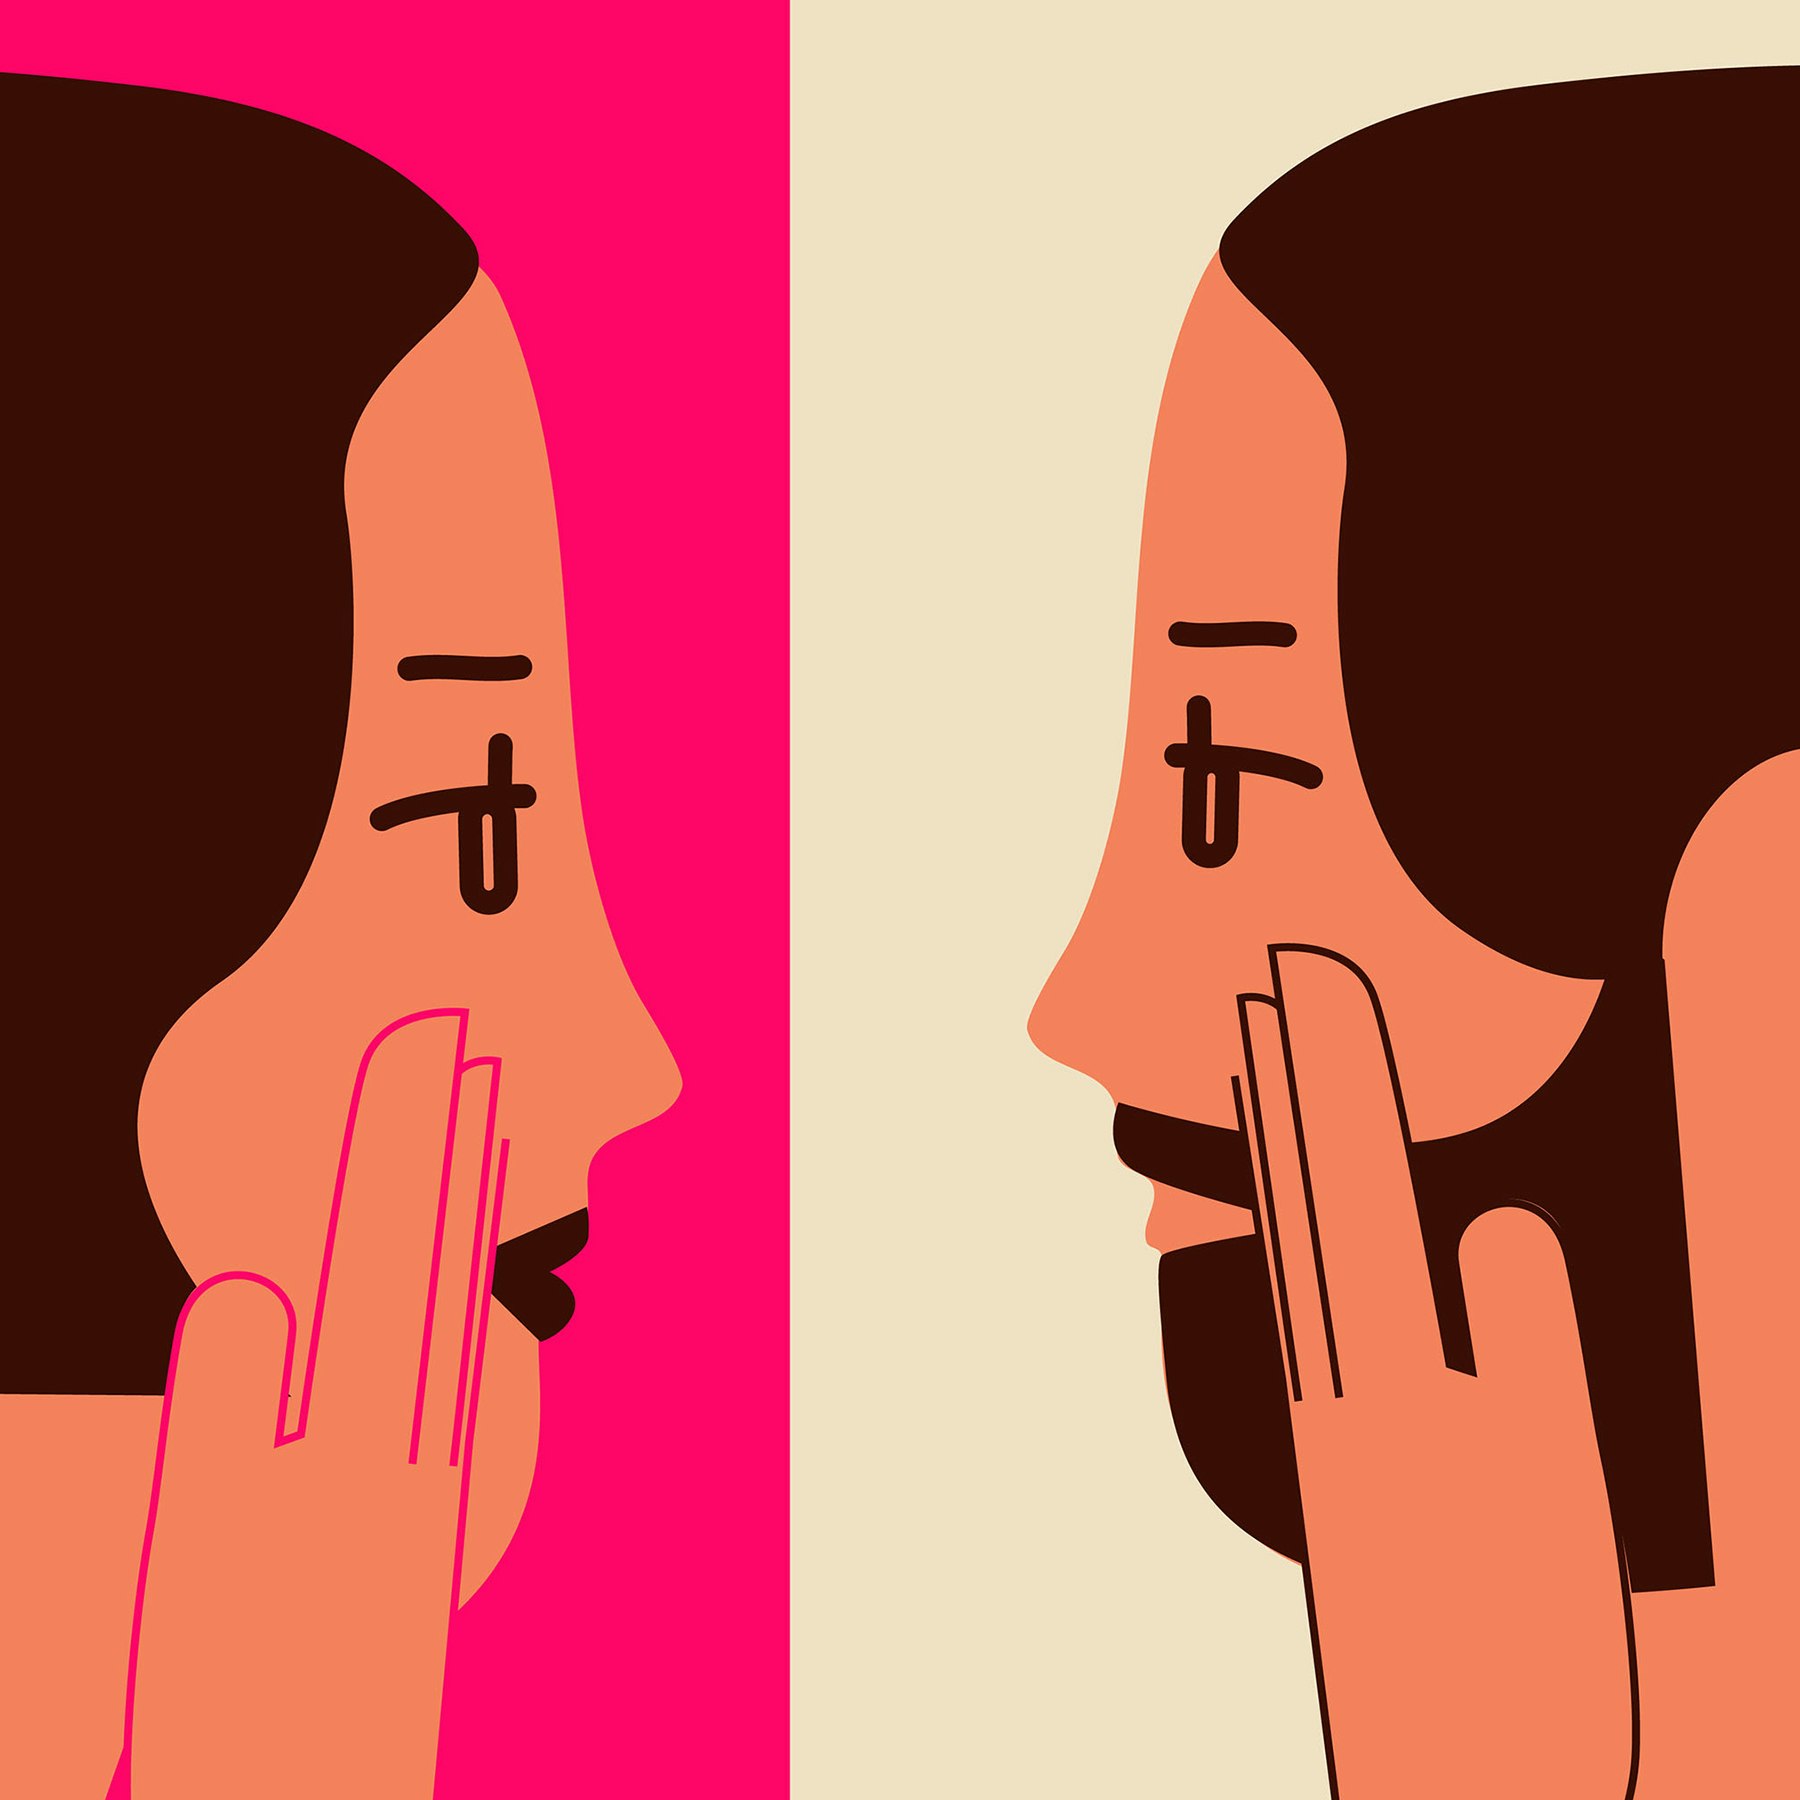 A stylized illustration of a mirrored profile. On the left, the profile is visibly femme; on the right, the profile appears masculine.